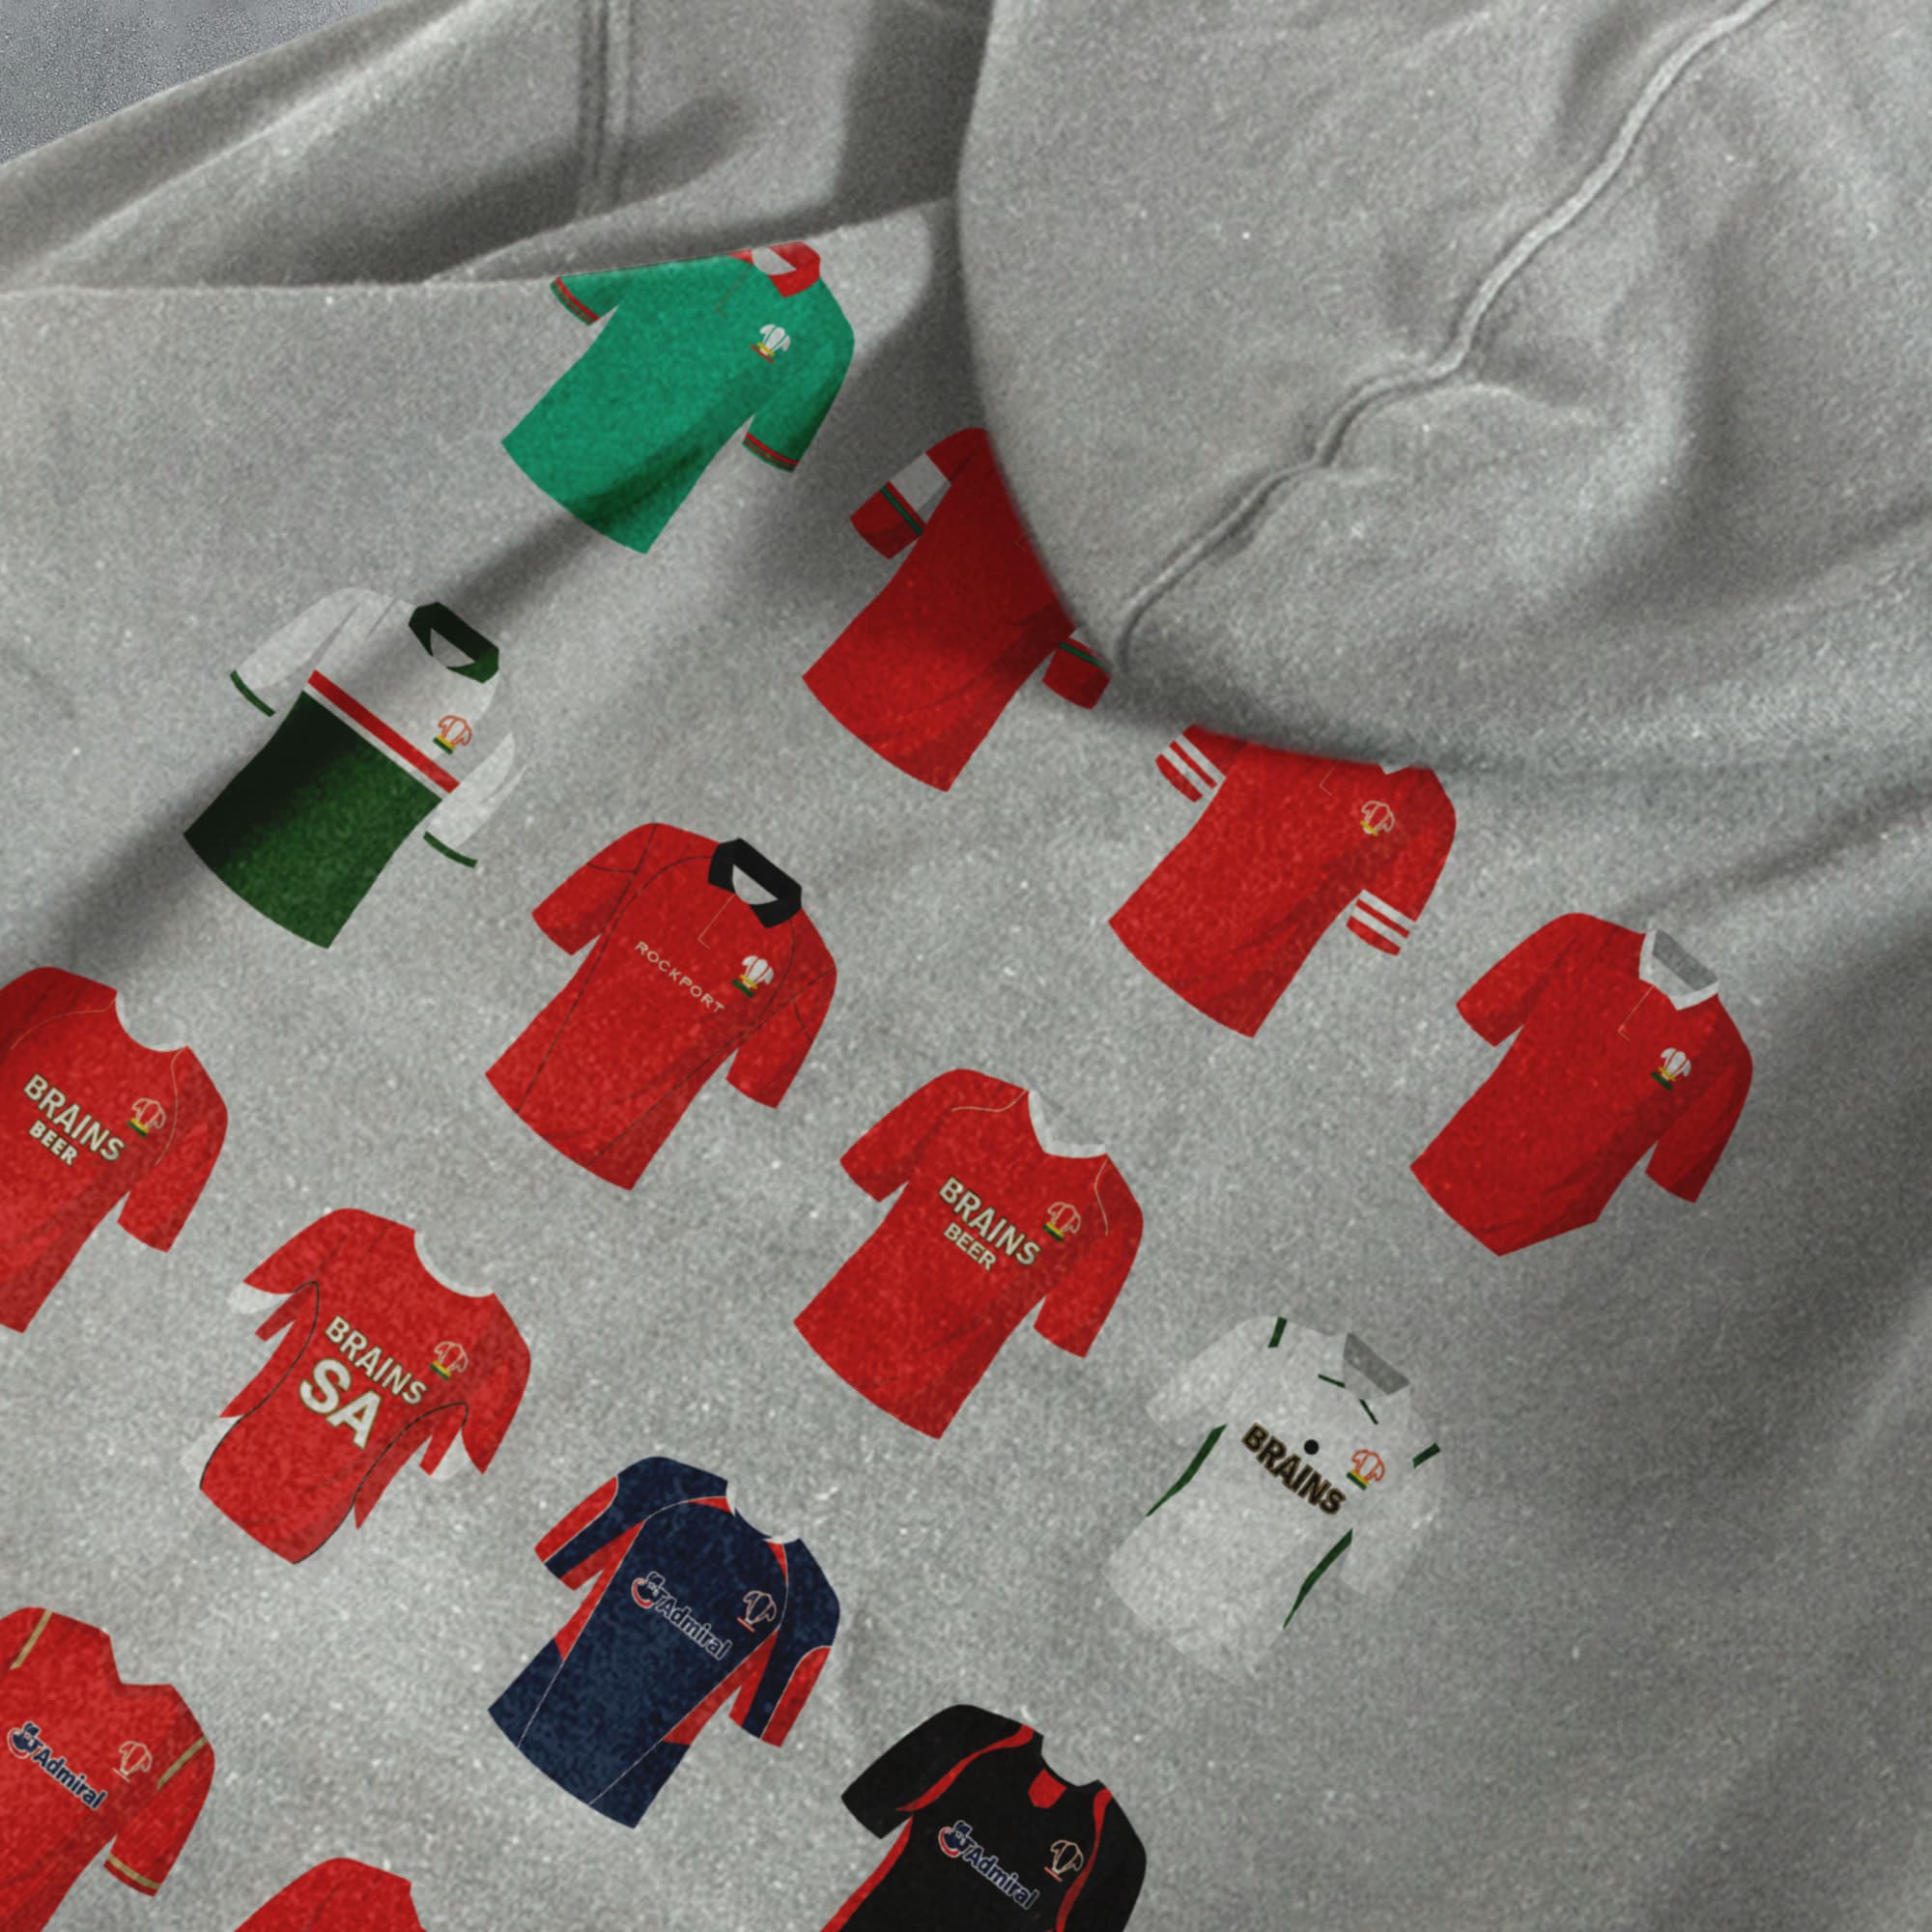 Wales Rugby Union Classic Kits Hoodie